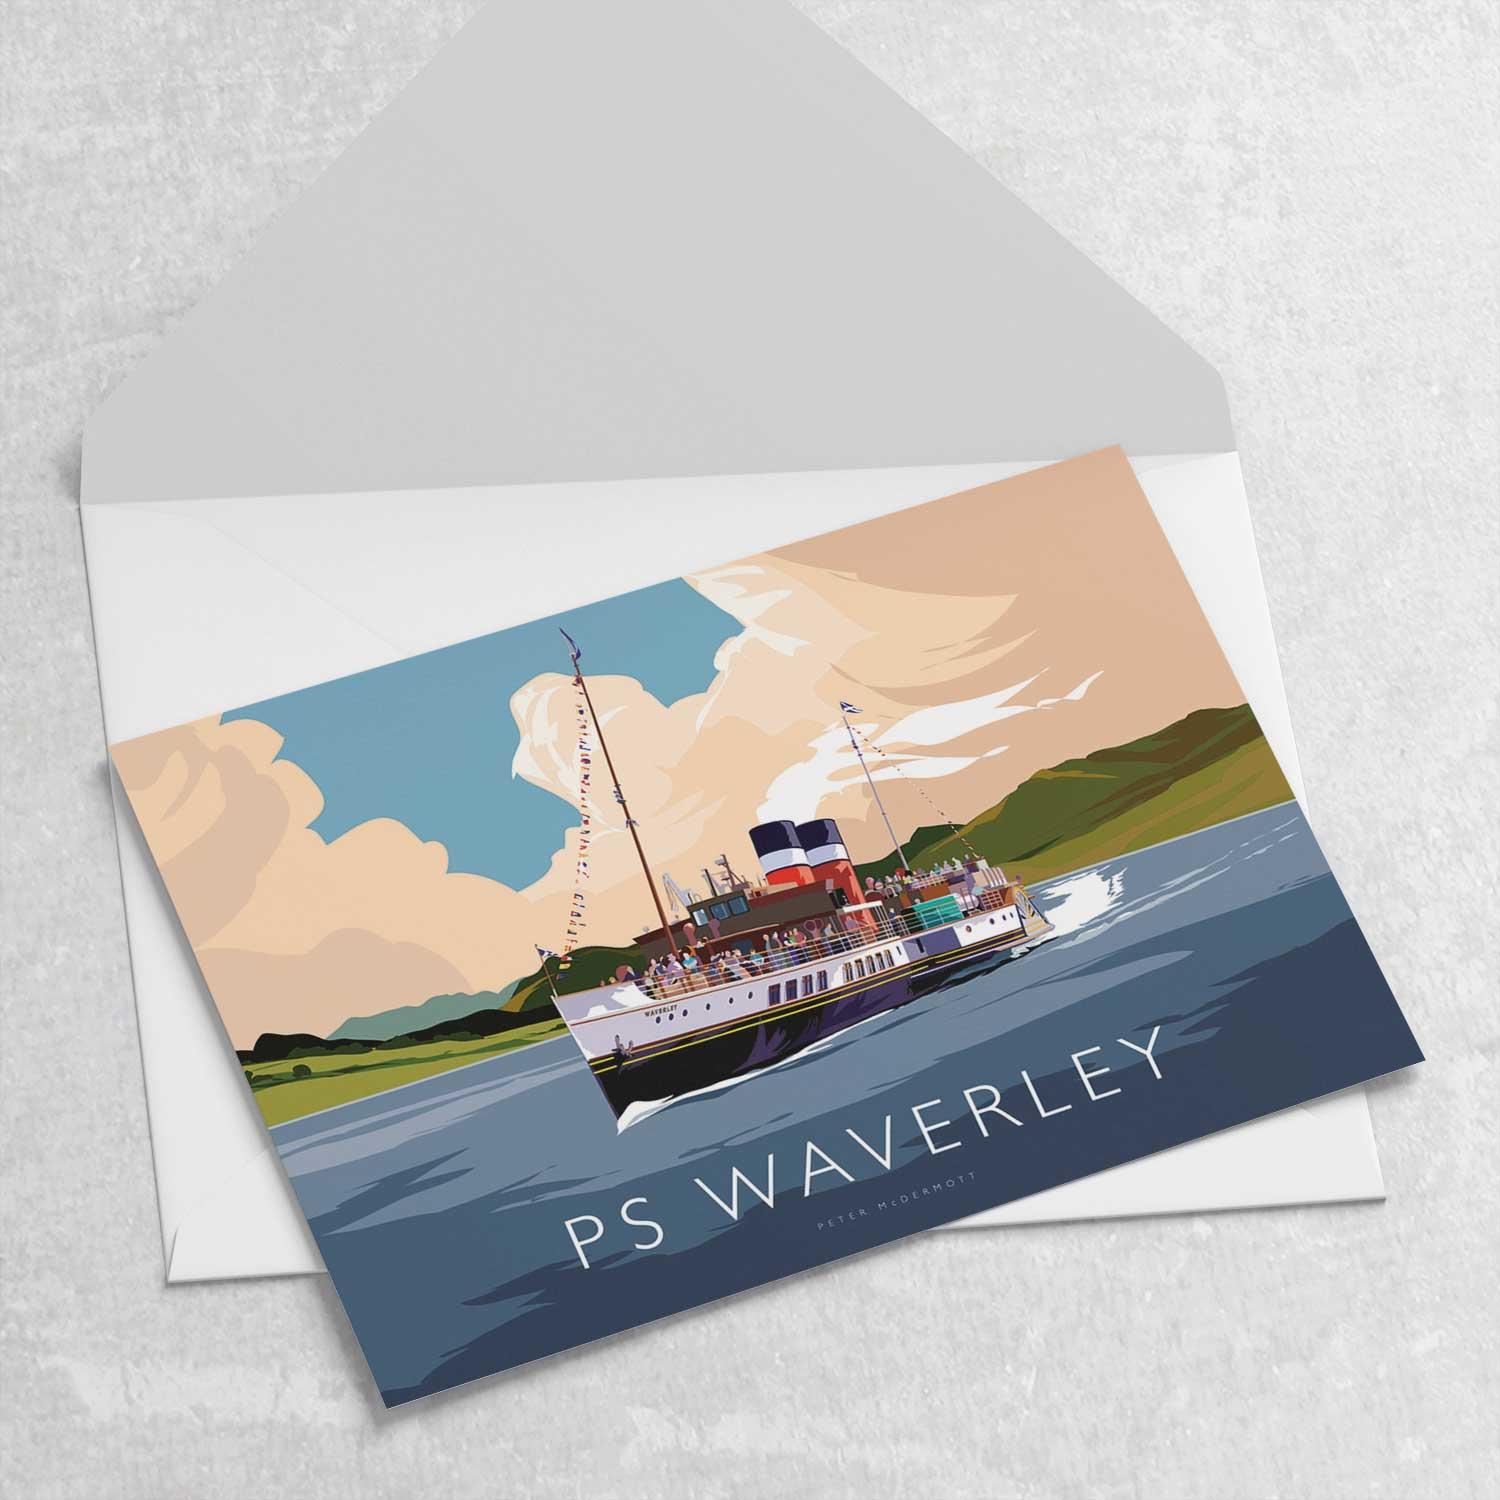 PS Waverley Greeting Card from an original painting by artist Peter McDermott